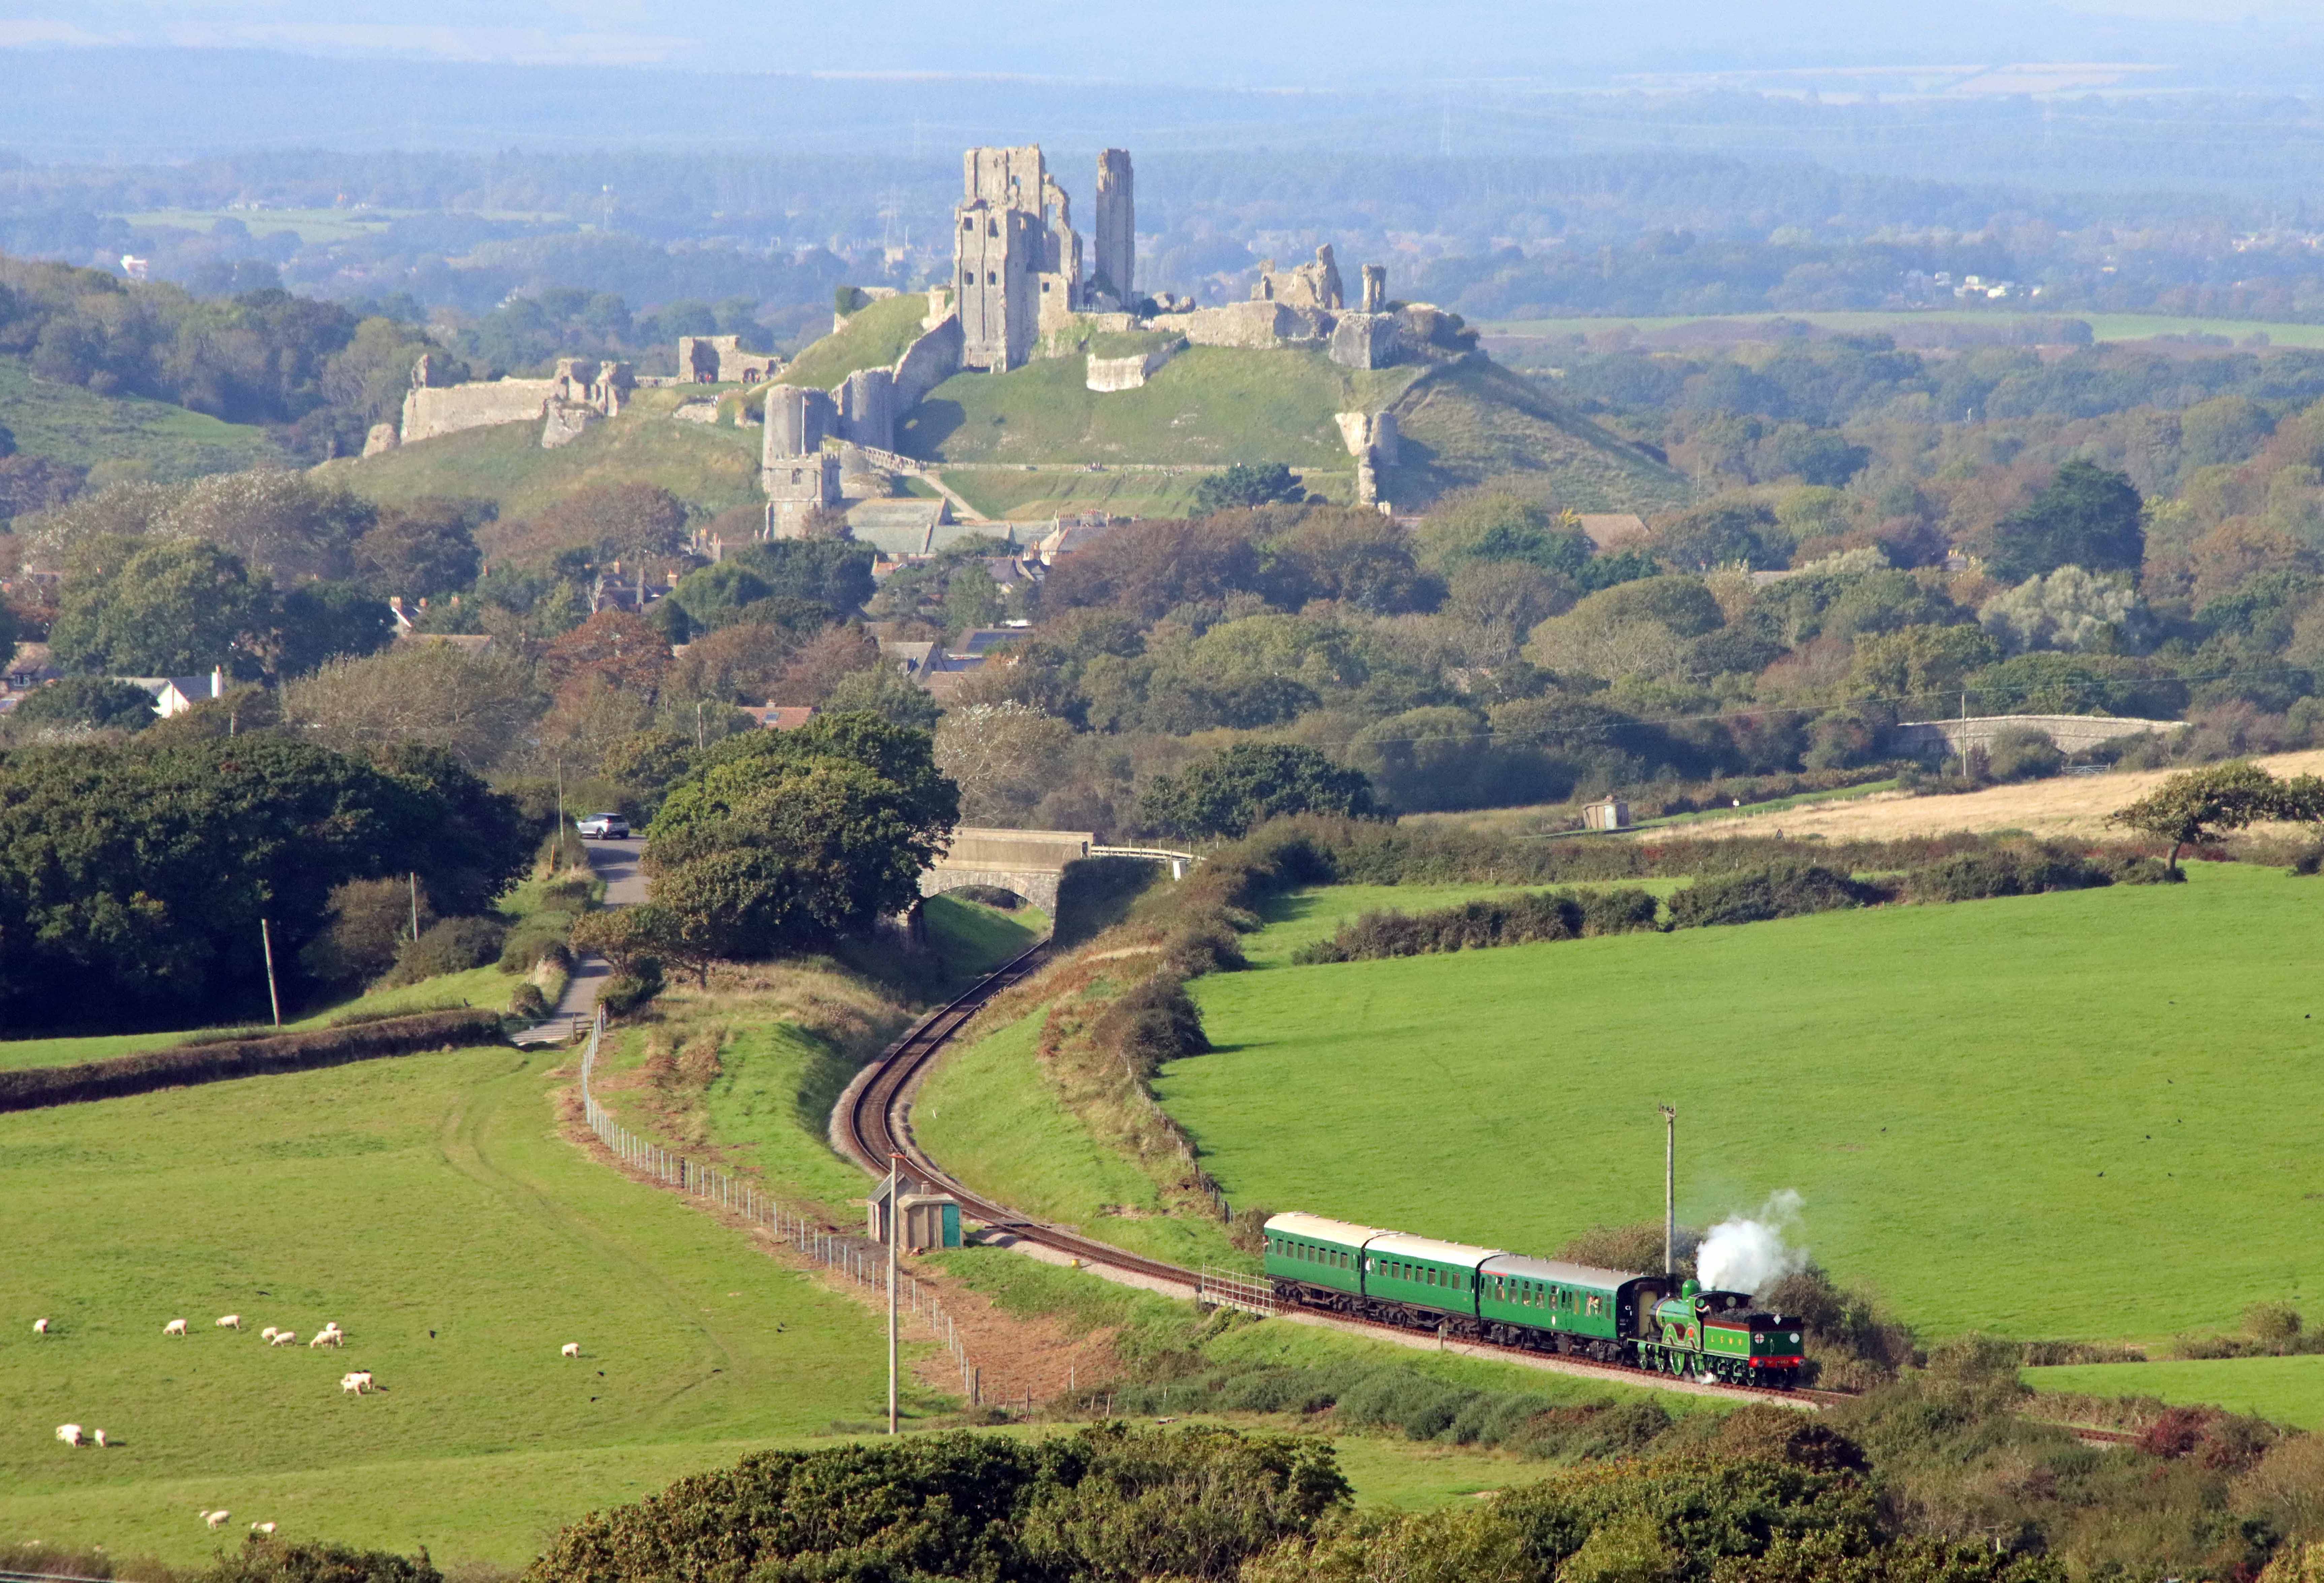 The locomotive running with Corfe Castle in the background